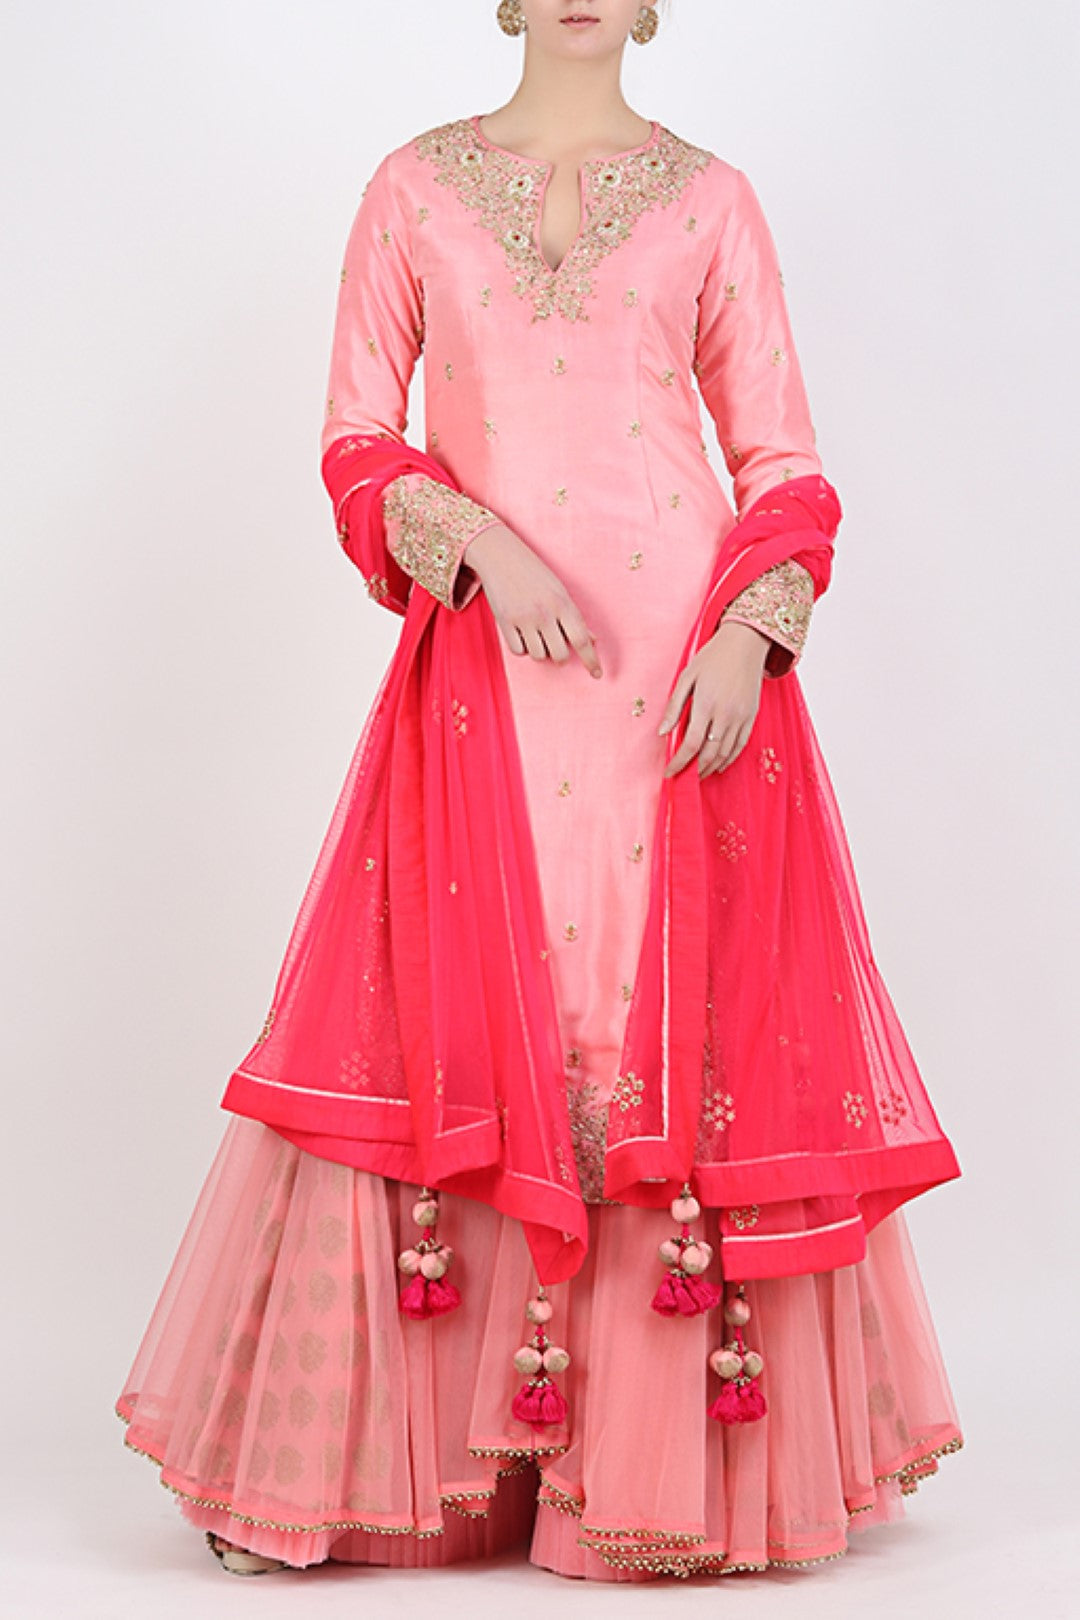 ROSE PINK EMBROIDERED APPLE CUT KURTA WITH DOUBLE LAYERED BROCADE SKIRT AND DUPATTA.